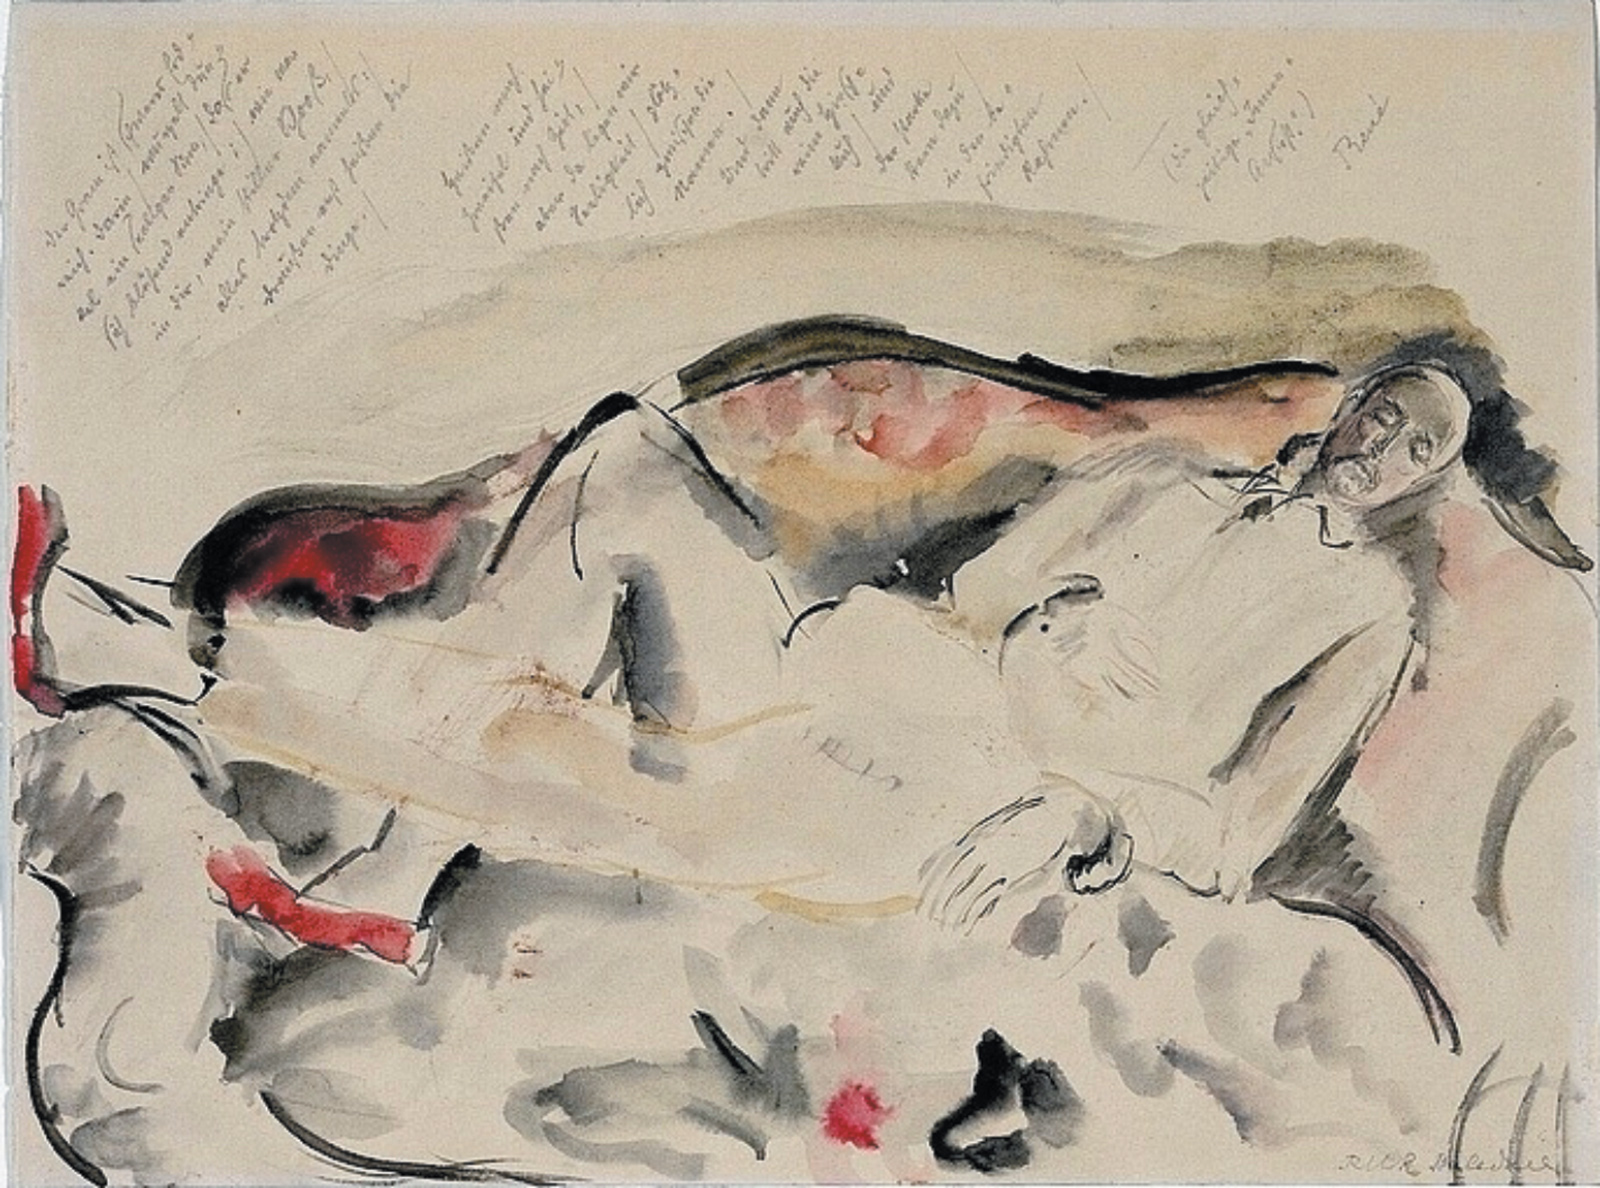 Baladine Klossowska: La Contemplation Intérieure (Rilke dormant sur un petit sofa à Muzot), 1921; watercolor portrait of Rainer Maria Rilke by his lover Klossowska, at the top of which he wrote a poem that is translated into English for the first time below.